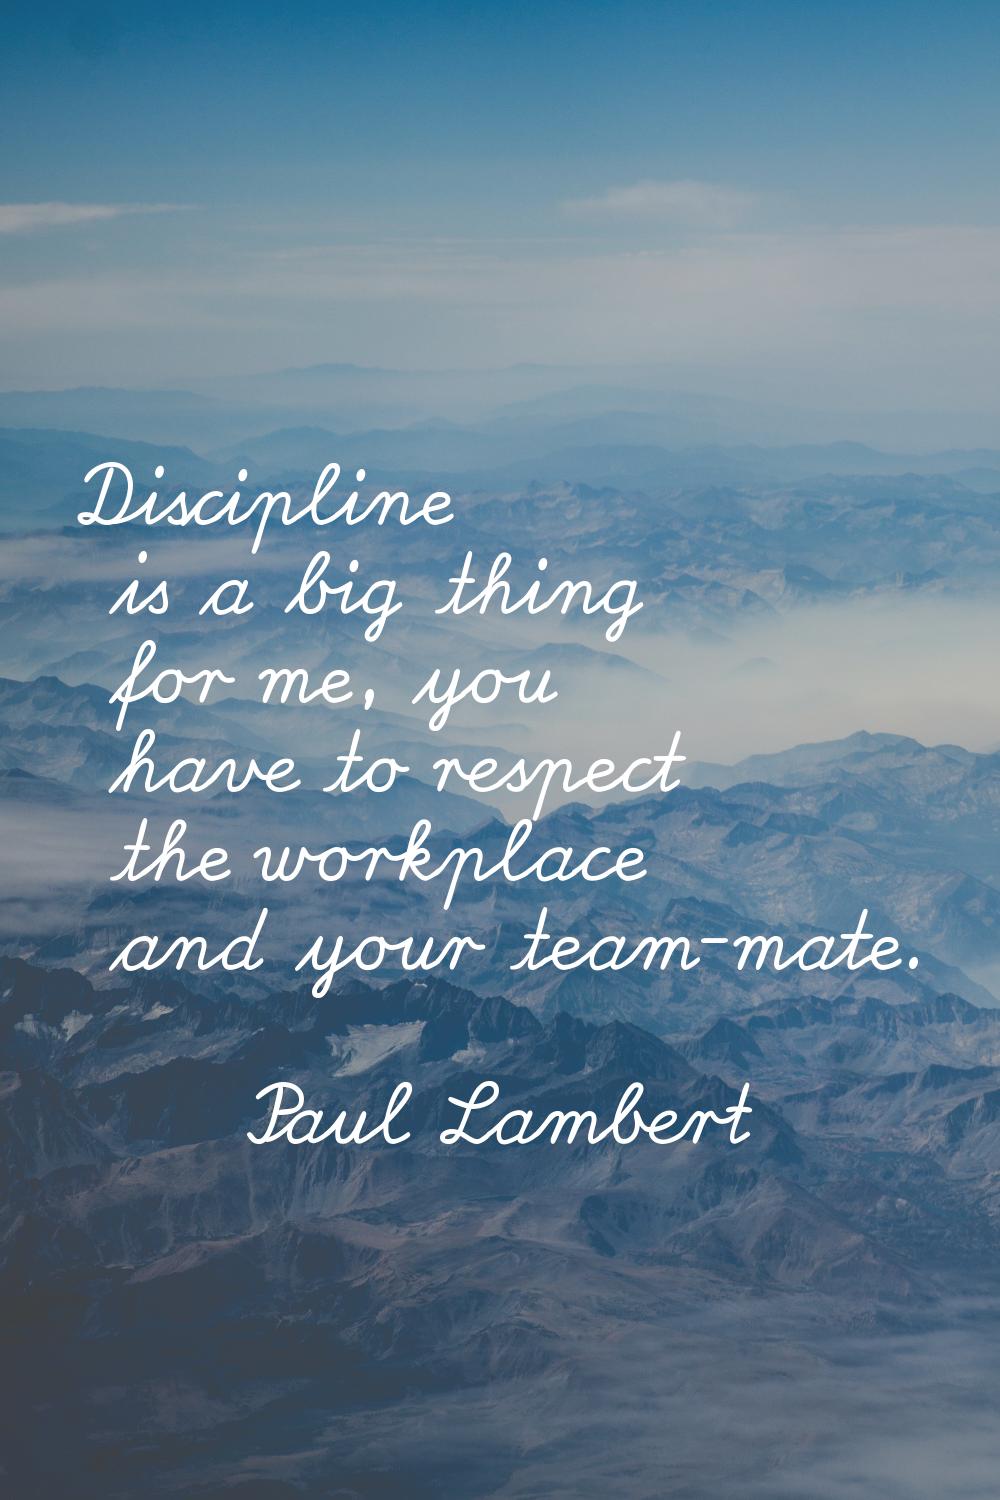 Discipline is a big thing for me, you have to respect the workplace and your team-mate.